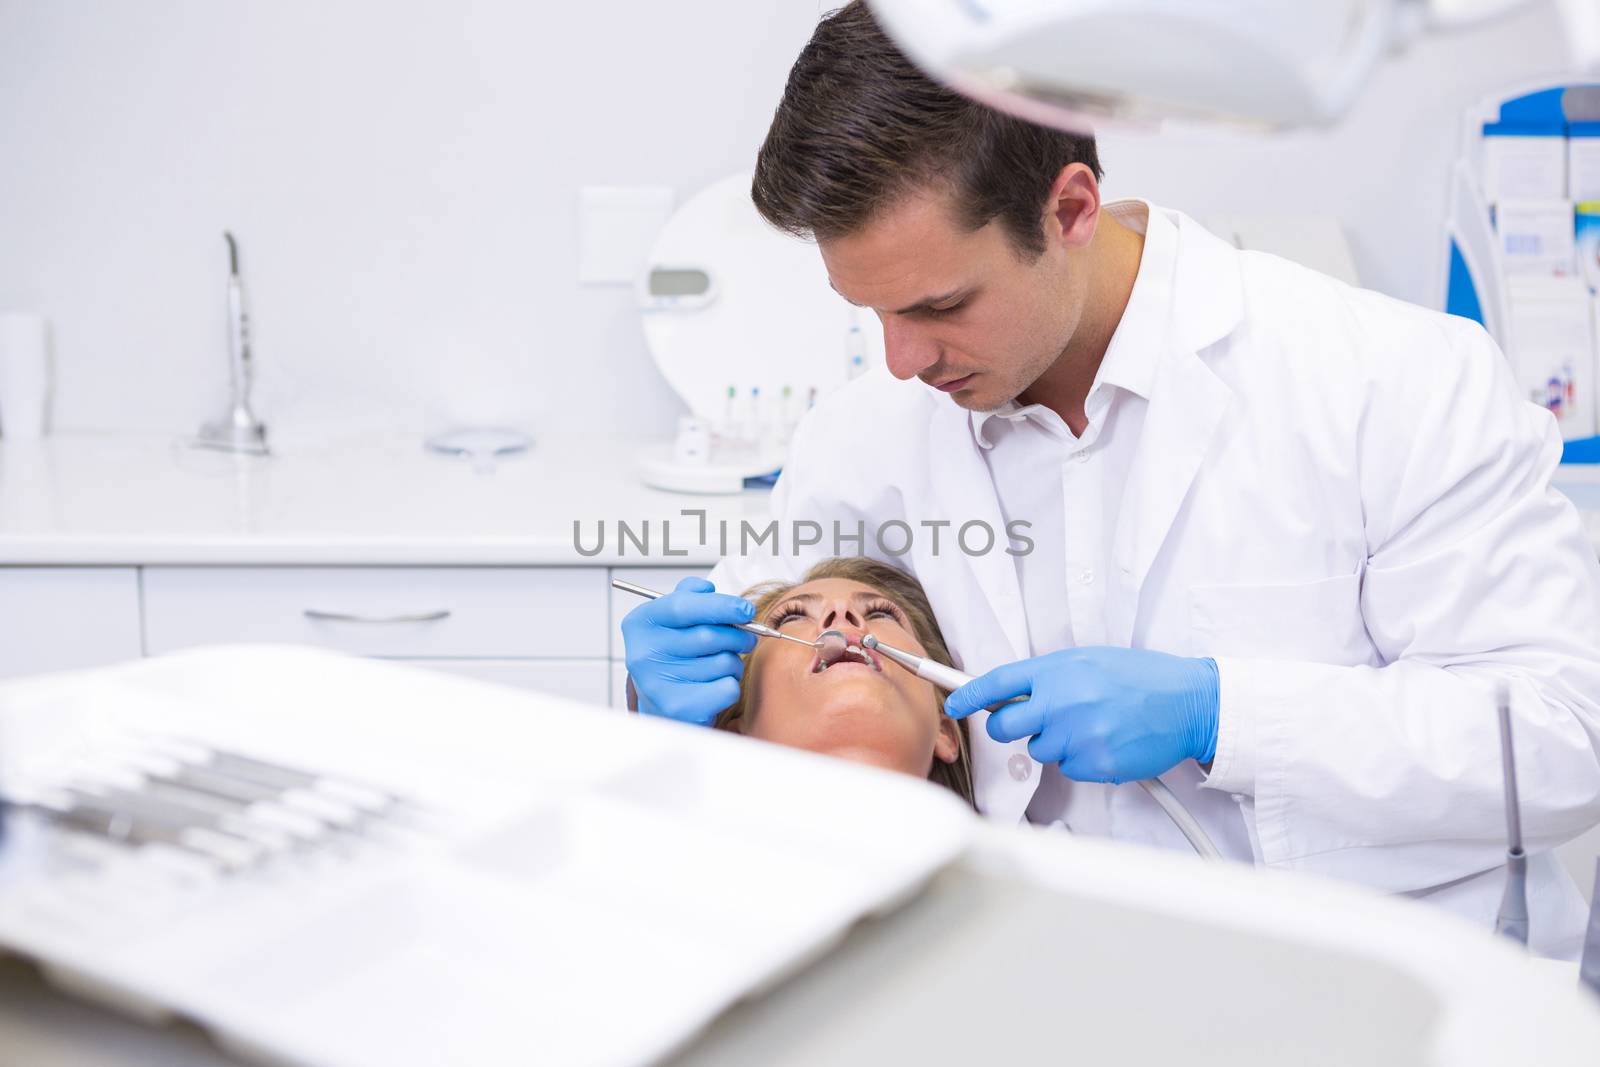 Dentist holding medical equipment while giving treatment to woman by Wavebreakmedia